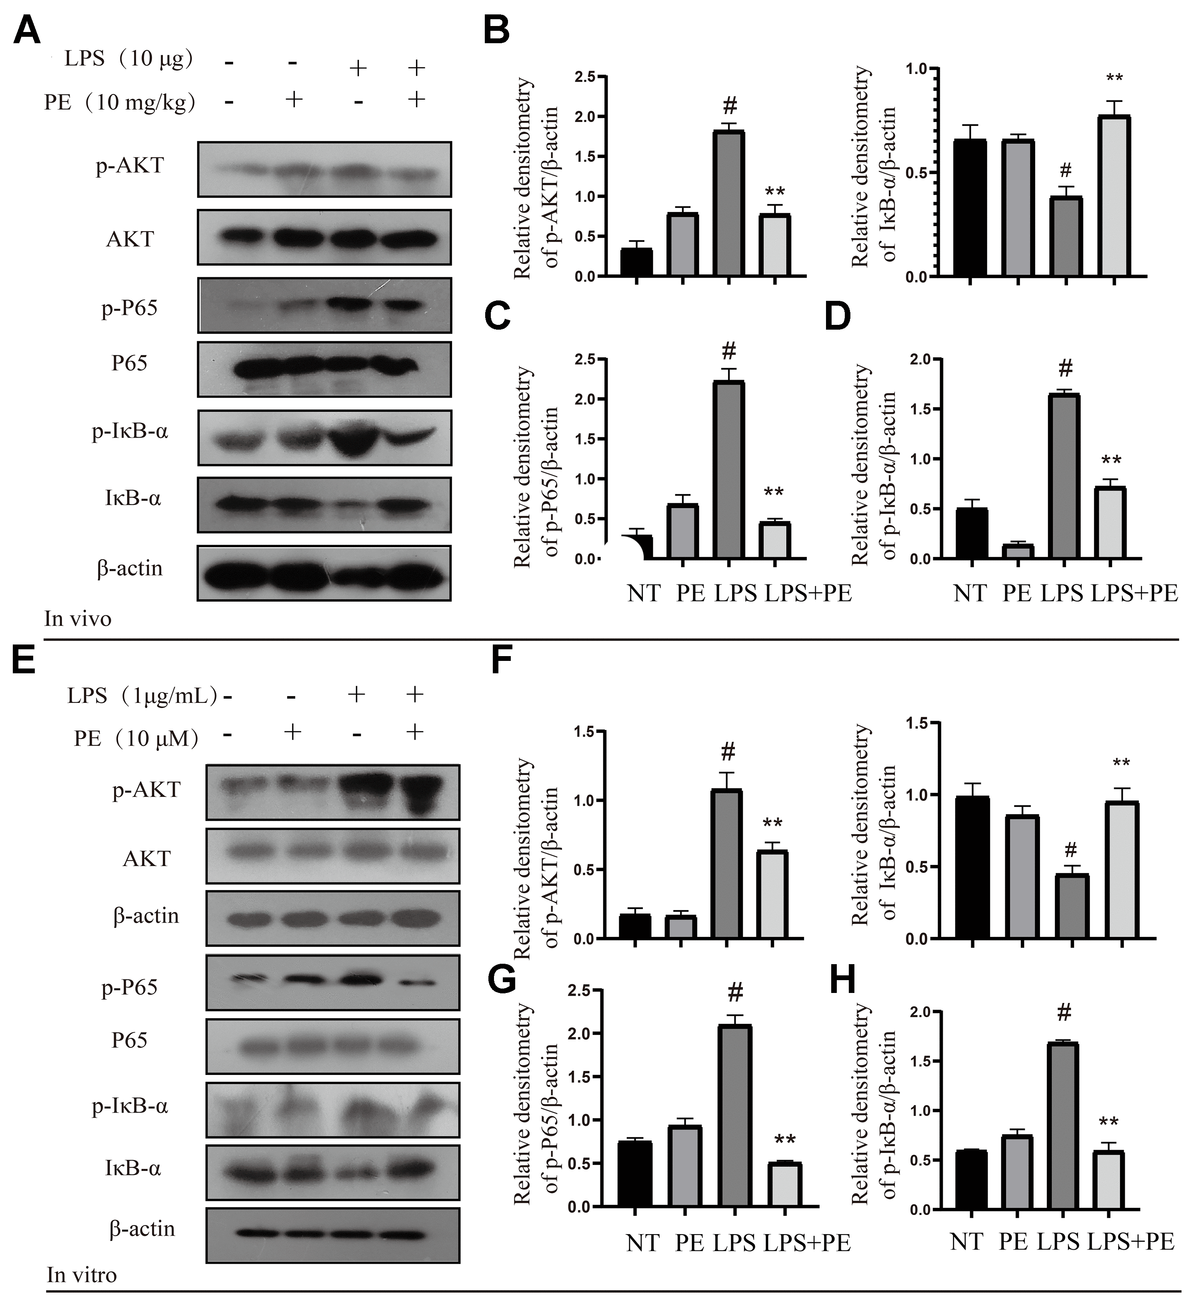 Effect of PE on AKT/NF-κB signal pathway in mastitis models in vivo and in vitro. PE was given orally for 7 days. The fourth pair of milk ducts in mice were injected with LPS for 24 h. The mice were killed by dislocation and fixed on the operating platform after LPS injection 24 h. The midline of abdomen was cut to collect mammary gland. PE was added to the cell culture medium at a concentration of 10 μM. After 1 h, LPS was added to the culture medium at a concentration of 1 μg/mL. The co-stimulation time was 12 h. (NP40) was added to mice mammary gland and mMECs, and then Western blot samples were prepared to obtain protein bands. (A–D) Western blot assay of p-AKT, AKT, p-P65, P65, p-IκB-α and IκB-α in mammary gland. (E–H) Western blot assay of p-AKT, AKT, p-P65, P65, p-IκB-α, IκB-α in mMECs. Each immunoreactive band was digitized and expressed as a ratio of the β-actin level. Values are presented as means ± SEM, three independent repeated experiments were performed. #p**p  0.01 vs. LPS group.